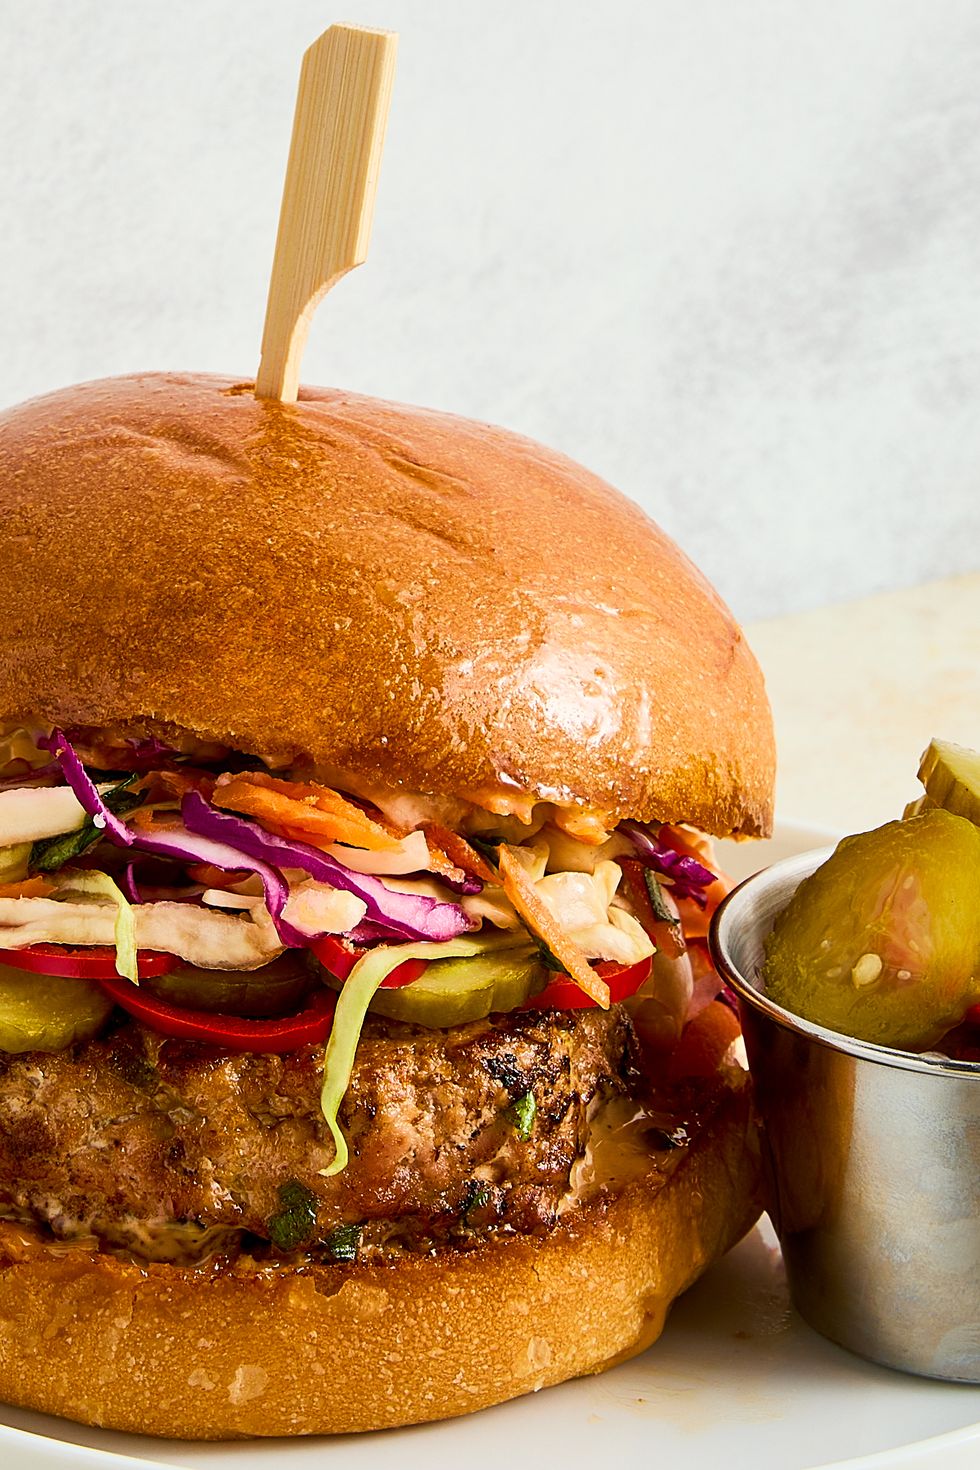 a ginger, garlic, and scallion studded turkey patty, pickled spicy peppers and cucumbers, a bright, crisp cabbage slaw, and plenty of sweet chili mayo all on a shiny, fluffy brioche bun